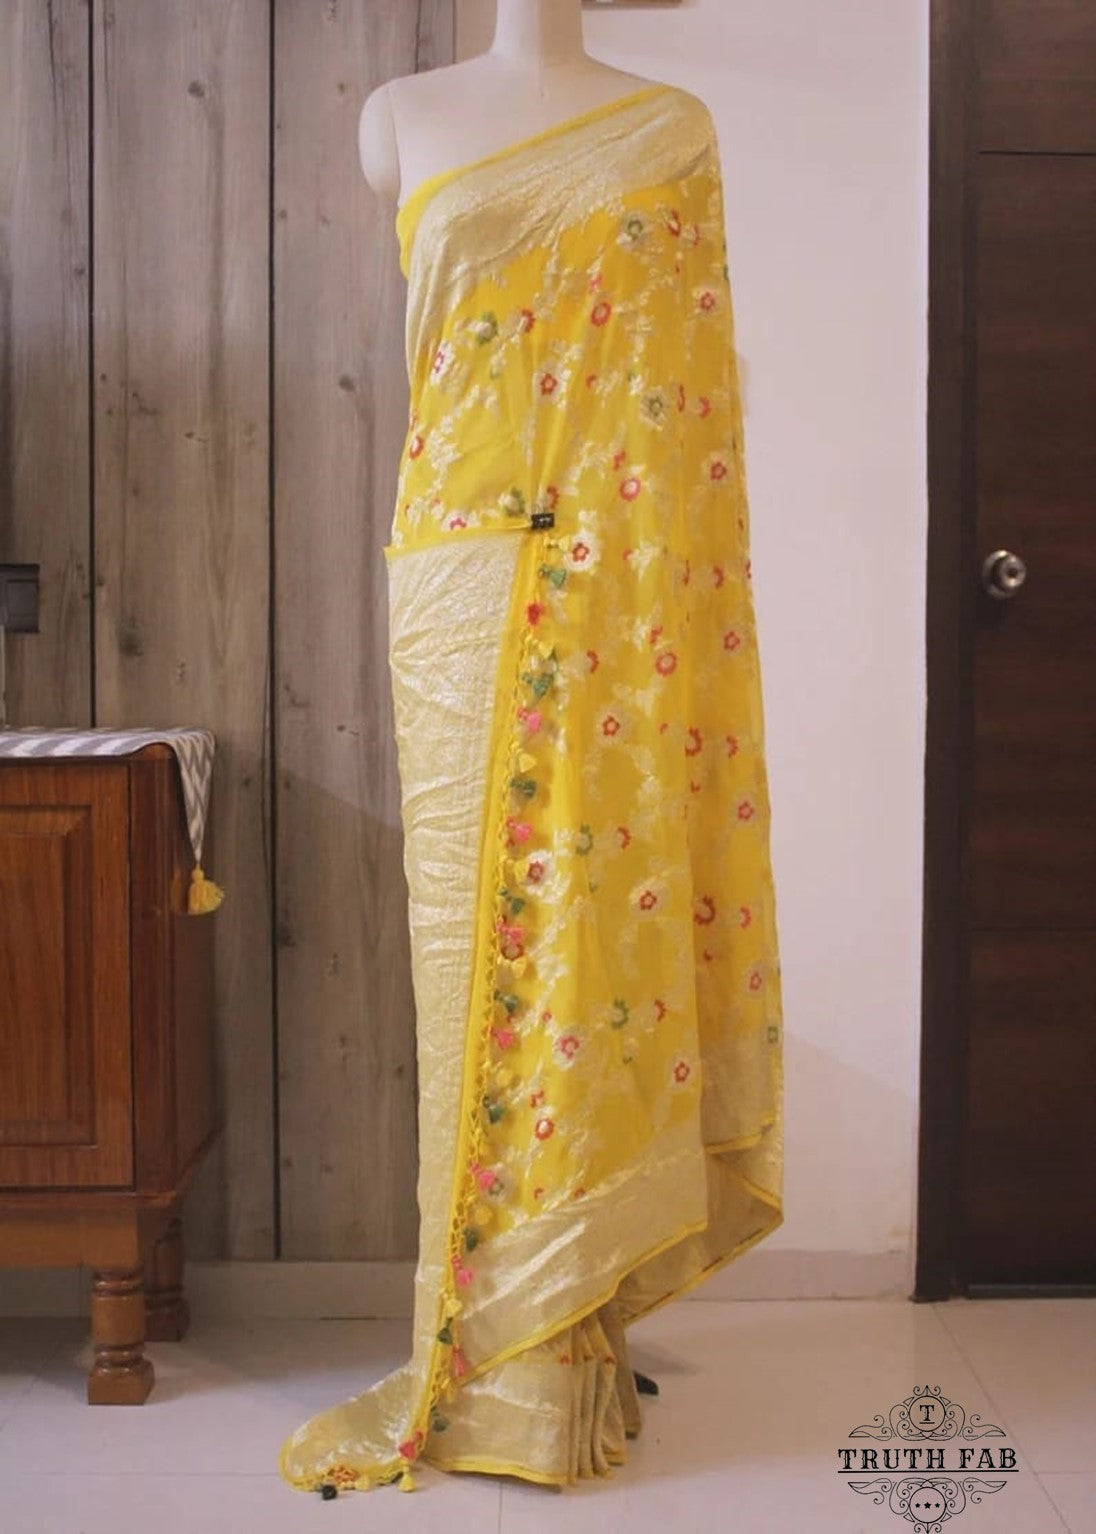 Georgette khaddi saree in sun flower yellow colour. Saree has a delicate water zari border with Gorgeous unique Motifs near pallu. The entire saree is beautiful with water zari meenakari design. It is an elegant traditional Banarasi saree. Irresistible wedding collection. This Mesmerising Saree is a Combination of Elegance and Style.